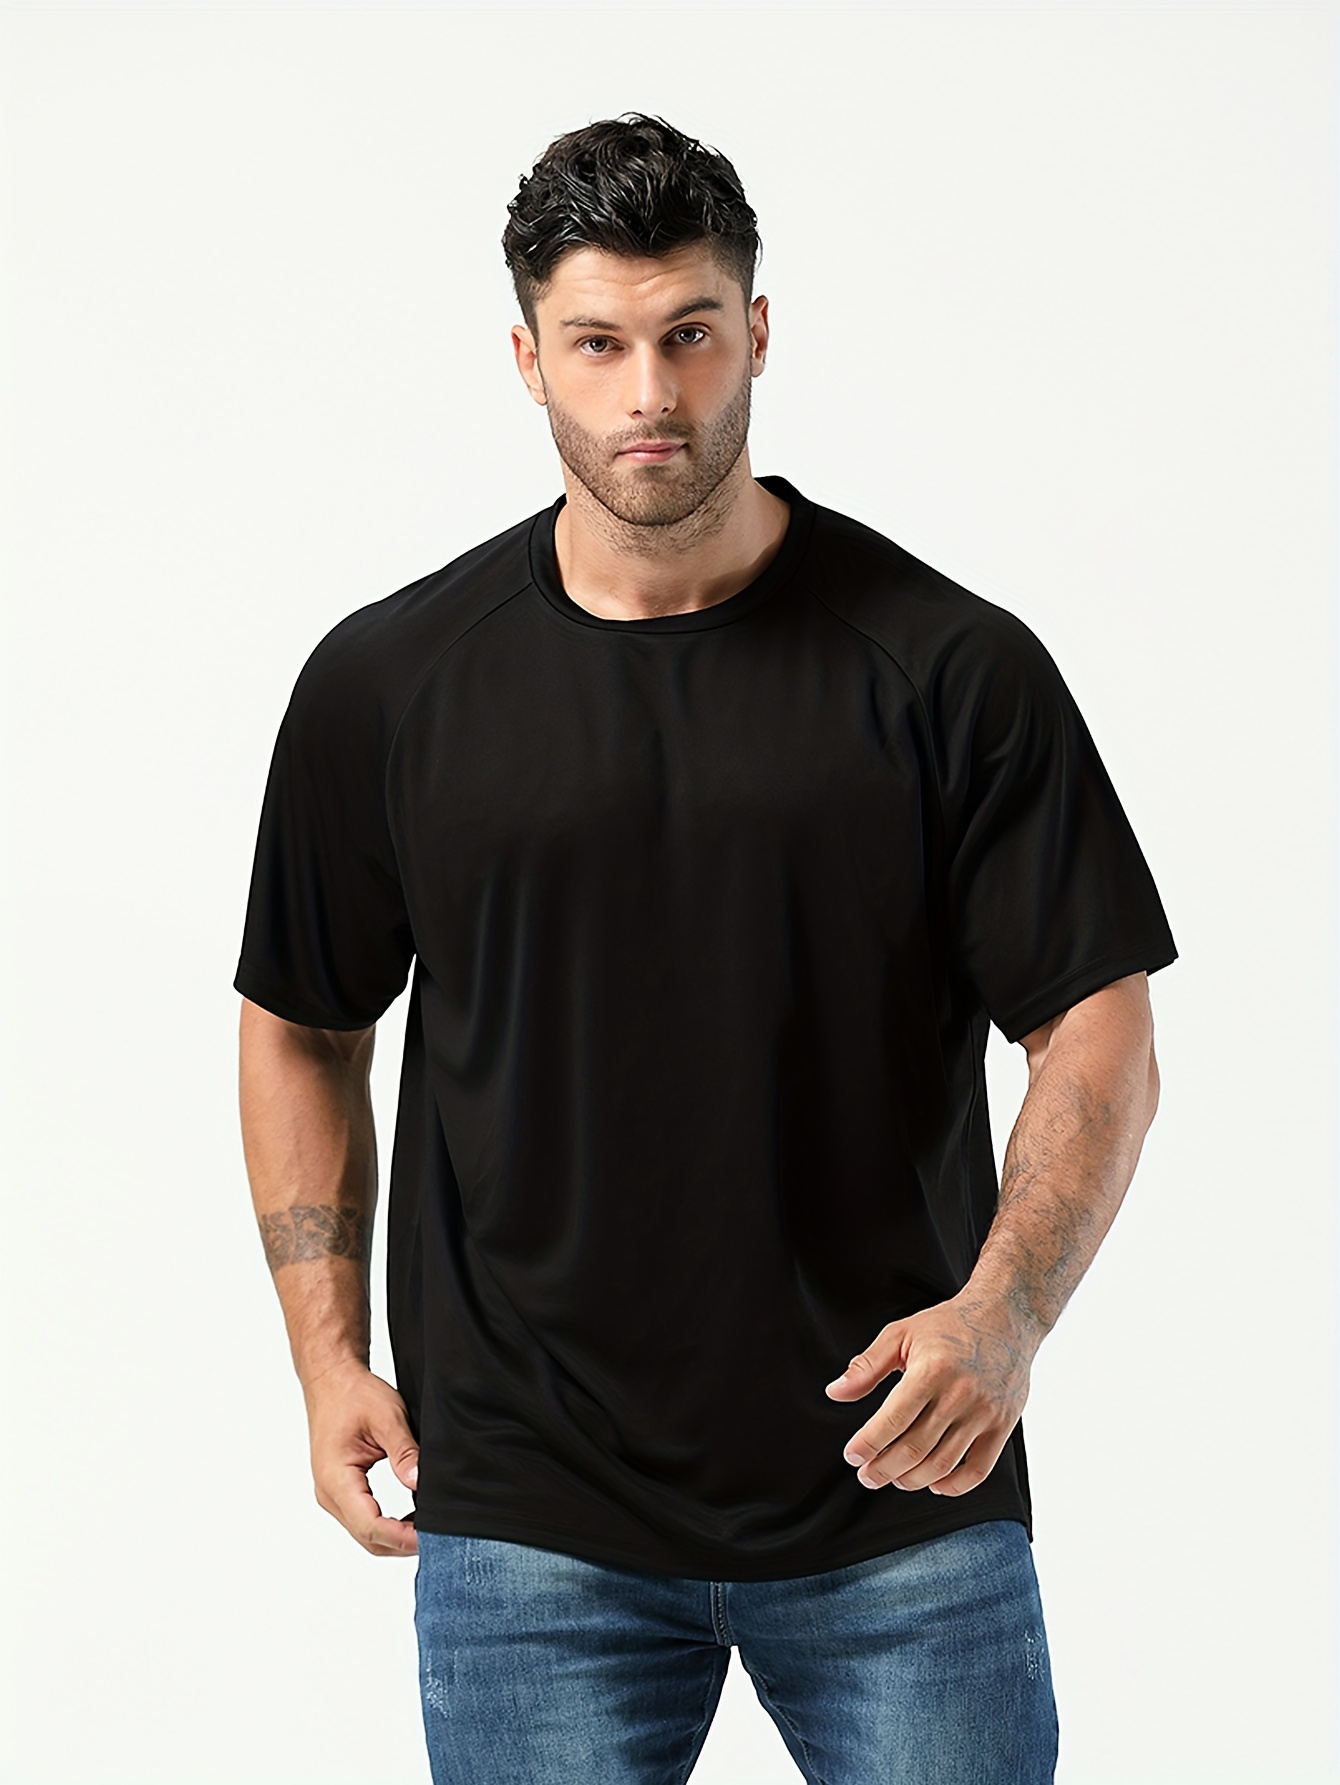 Mens Cotton tees Loose fit Fishing Shirt Men with Hood Muscle tee Shirts  for Men Lightweight Black Button up Shirt Men Short Sleeve Plus Size Clothes  3X Yoga Tops for Men Crop